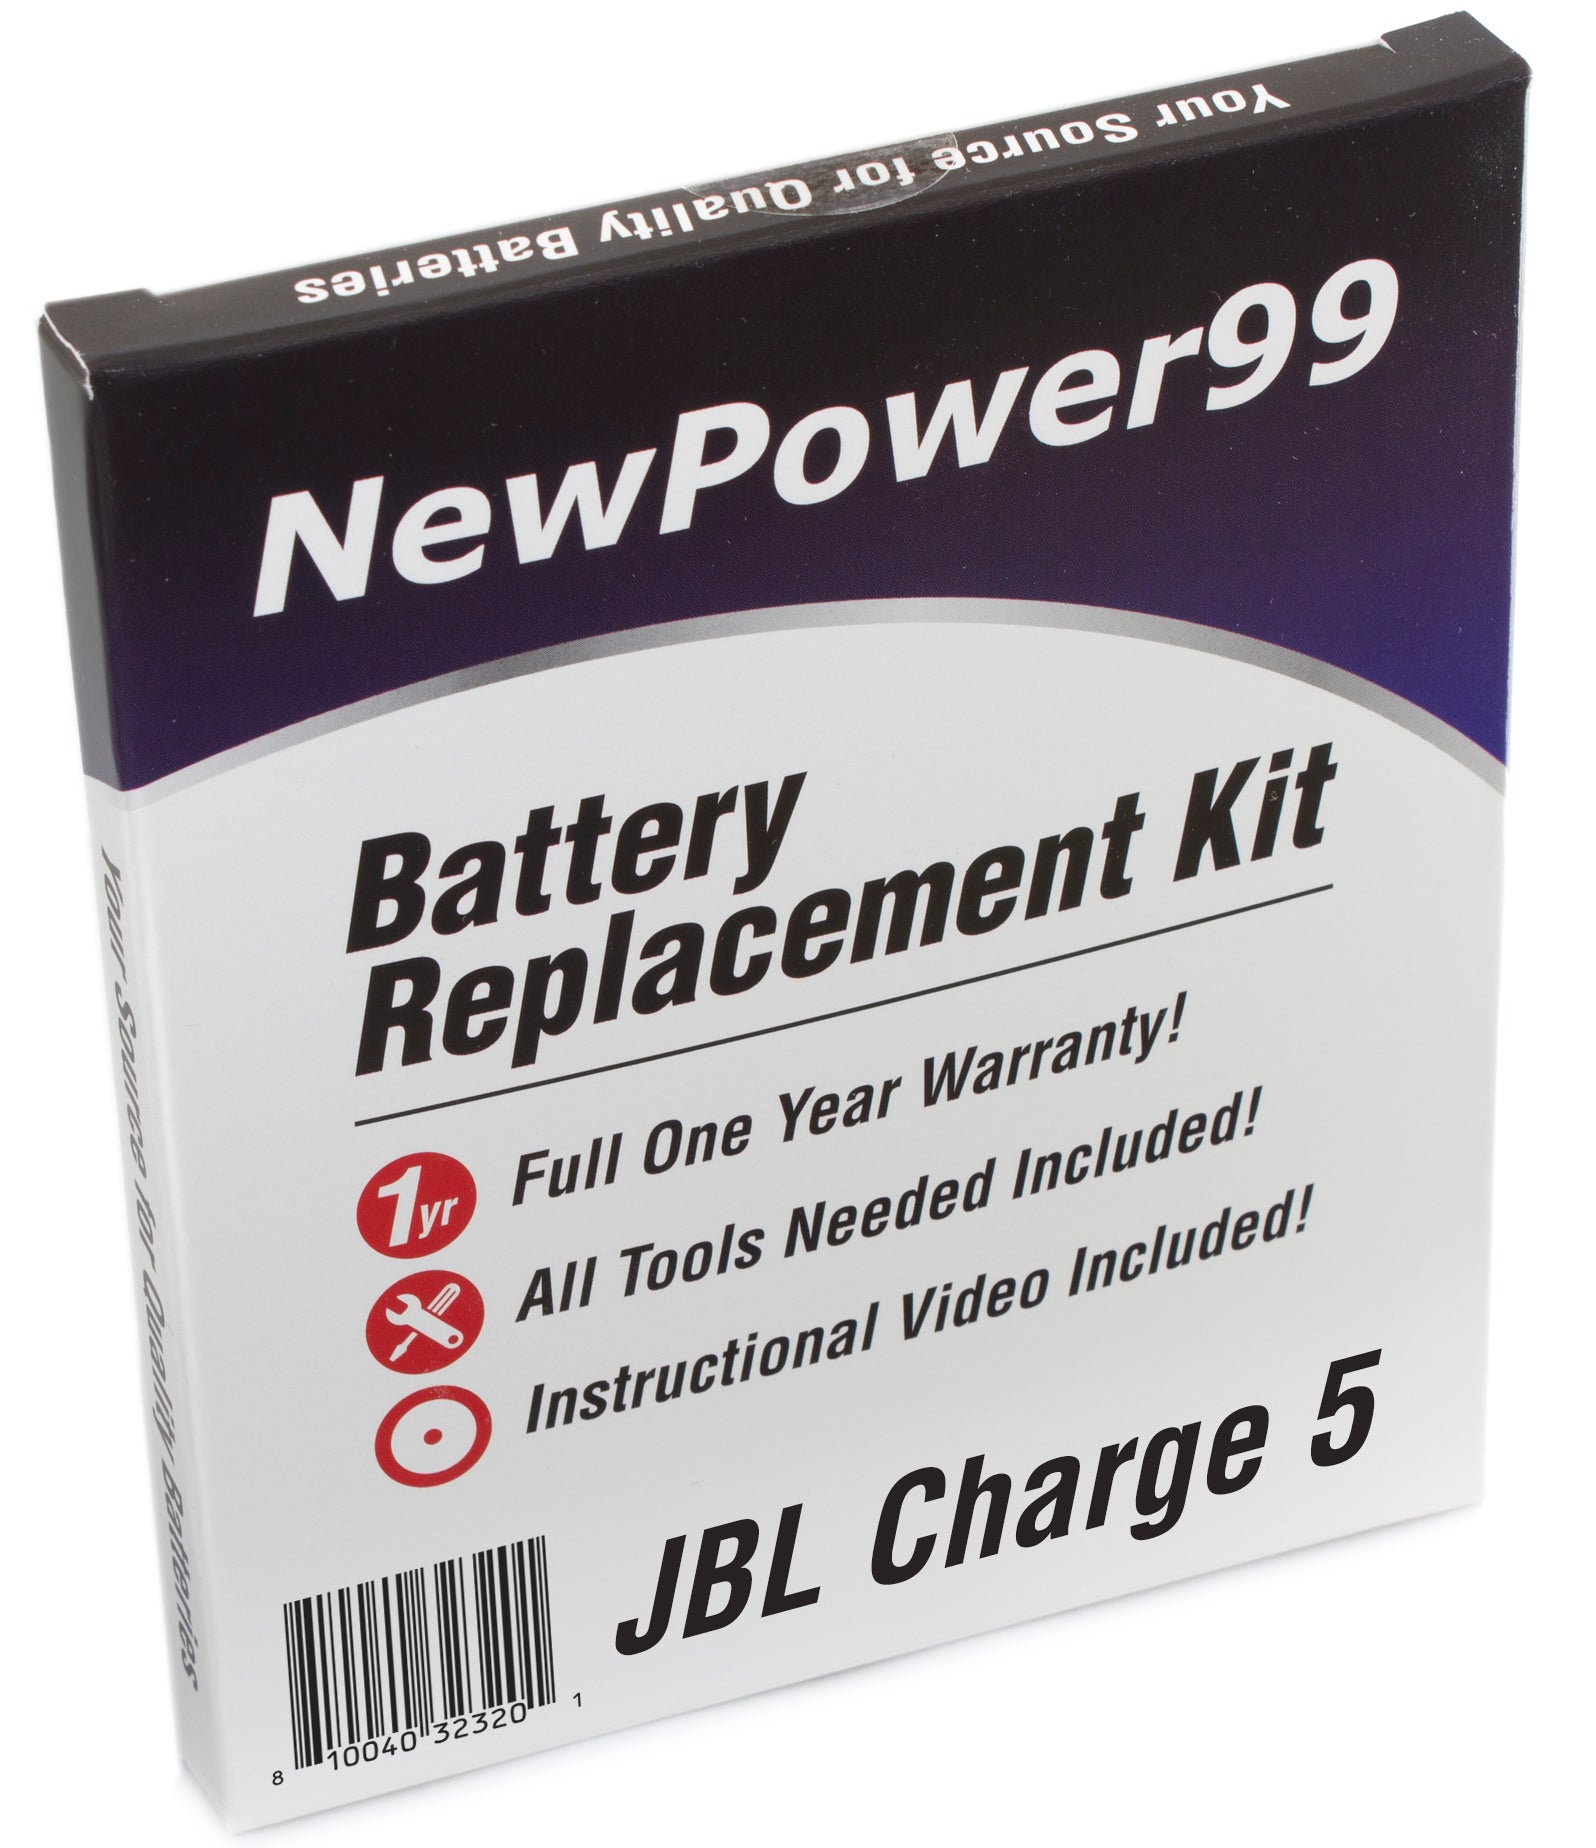 JBL Charge 5 Battery Replacement Kit with Special Installation Tools, Extended Life Battery, Video Instructions, and Full One Year Warranty